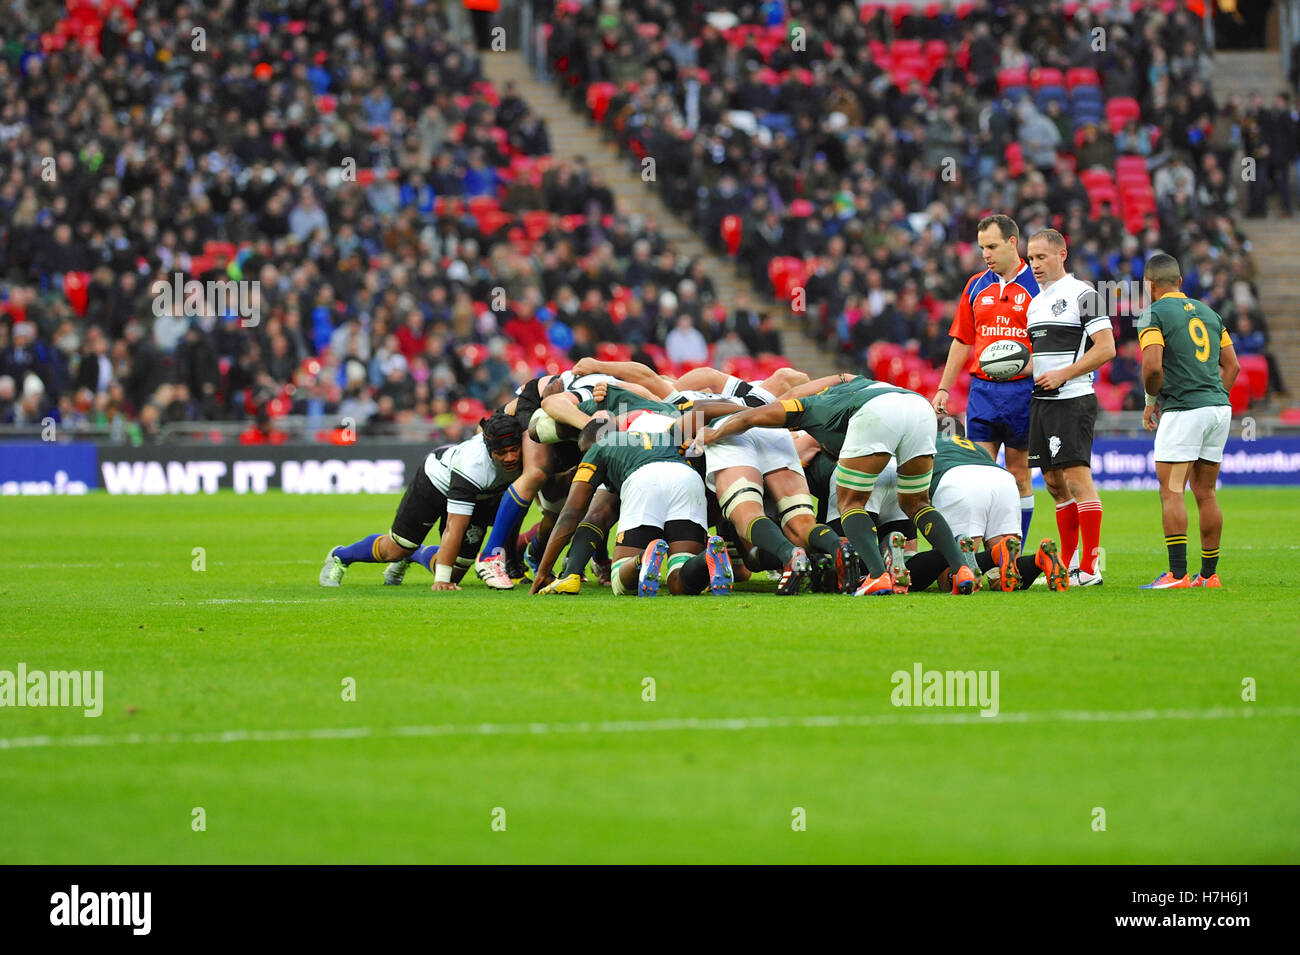 London, UK. 05th Nov, 2016. Barbarian and South African players locked into a scrum during the Barbarians V South Africa Killik Cup match at Wembley Stadium, London, UK. The match was a closely fought draw in the end, 31-31. The match was the invitational side's first appearance at Wembley since the Olympic Centenary match against Australia in 2008 and only the eighth time that they have played the Springboks since 1952. Credit:  Michael Preston/Alamy Live News Stock Photo